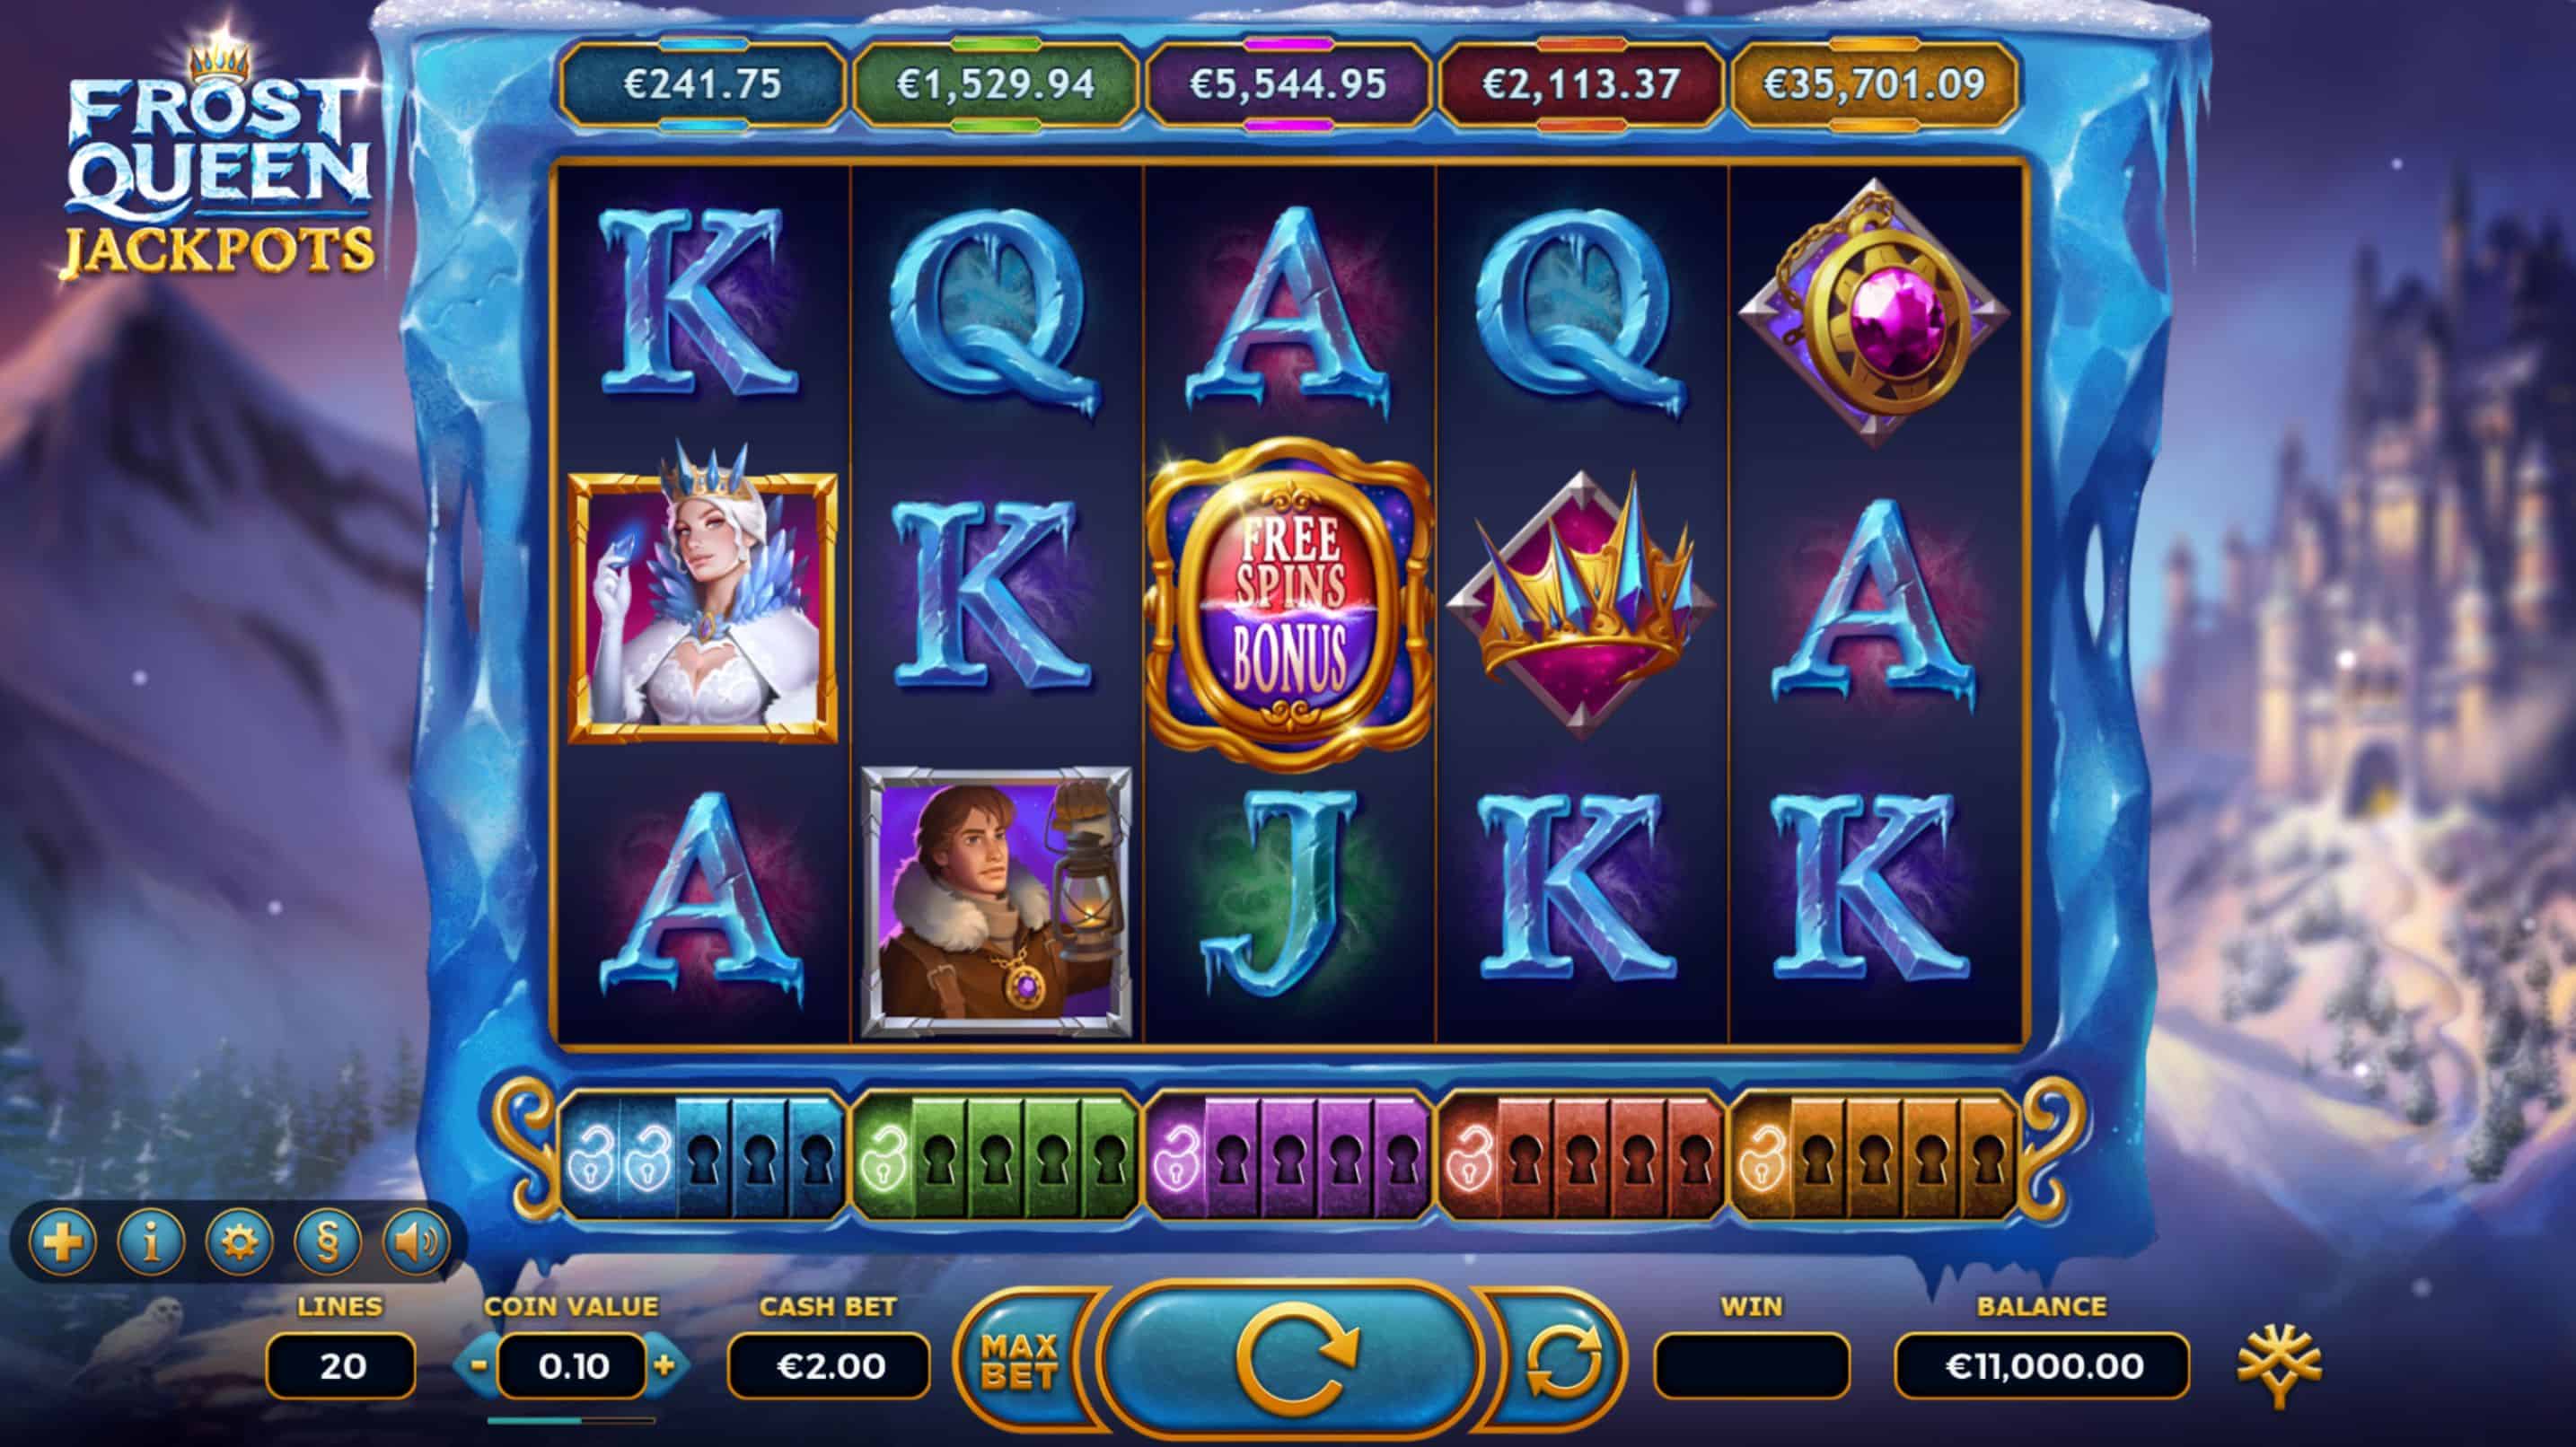 Frost Queen Jackpots Slot Game Free Play at Casino Ireland 01